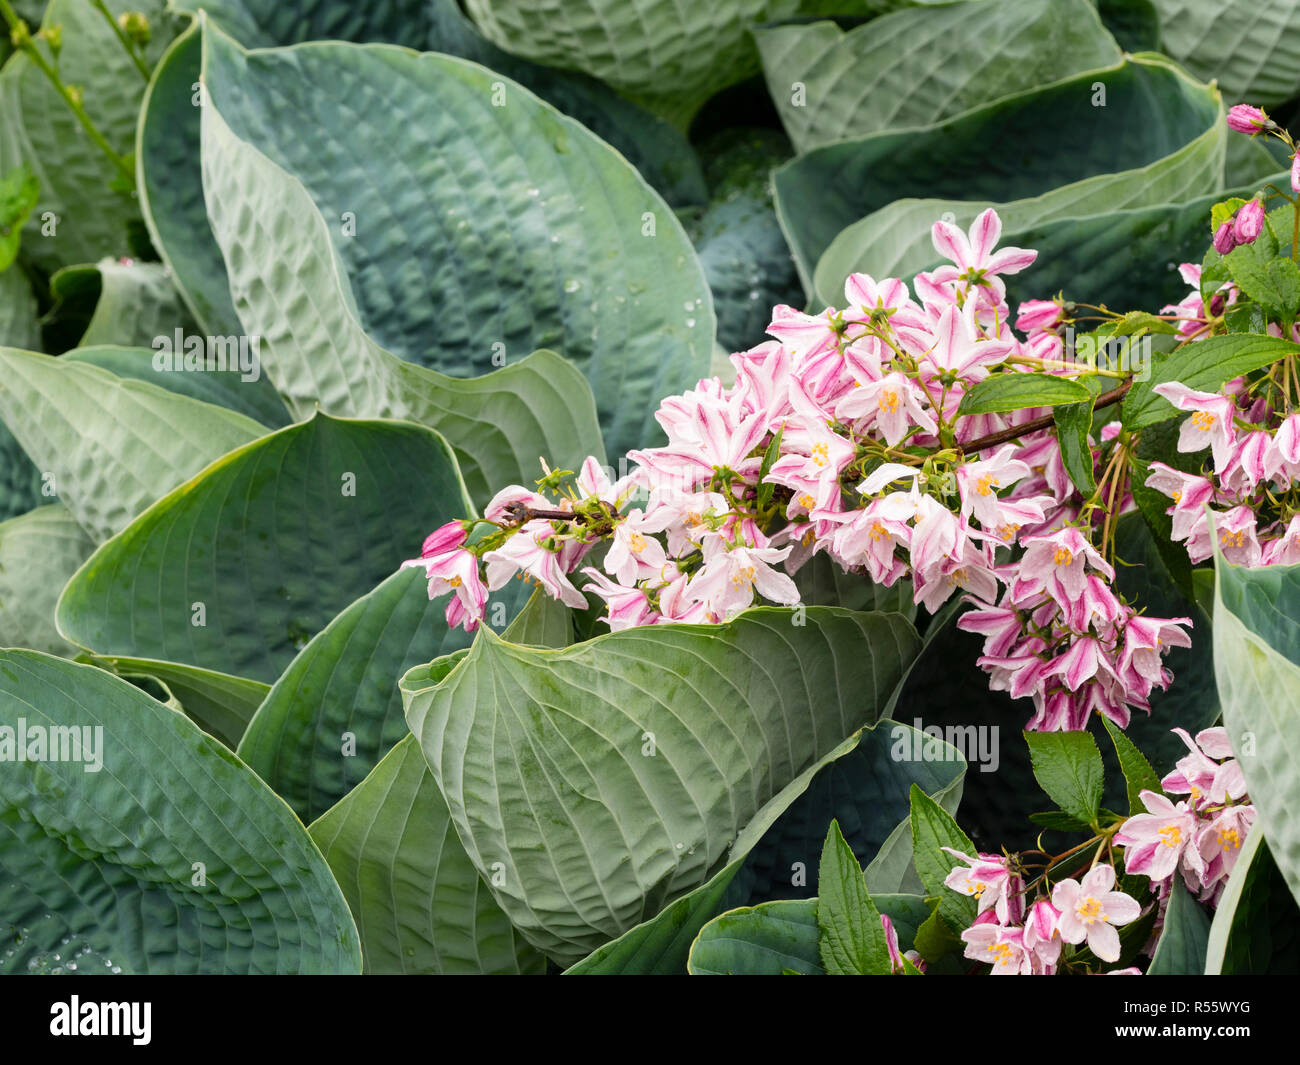 Large blue grey leaves of Hosta 'Abiqua Drinking Gourd' contrast with the pink and white flowers of Deutzia 'Iris Alford' in early summer display Stock Photo